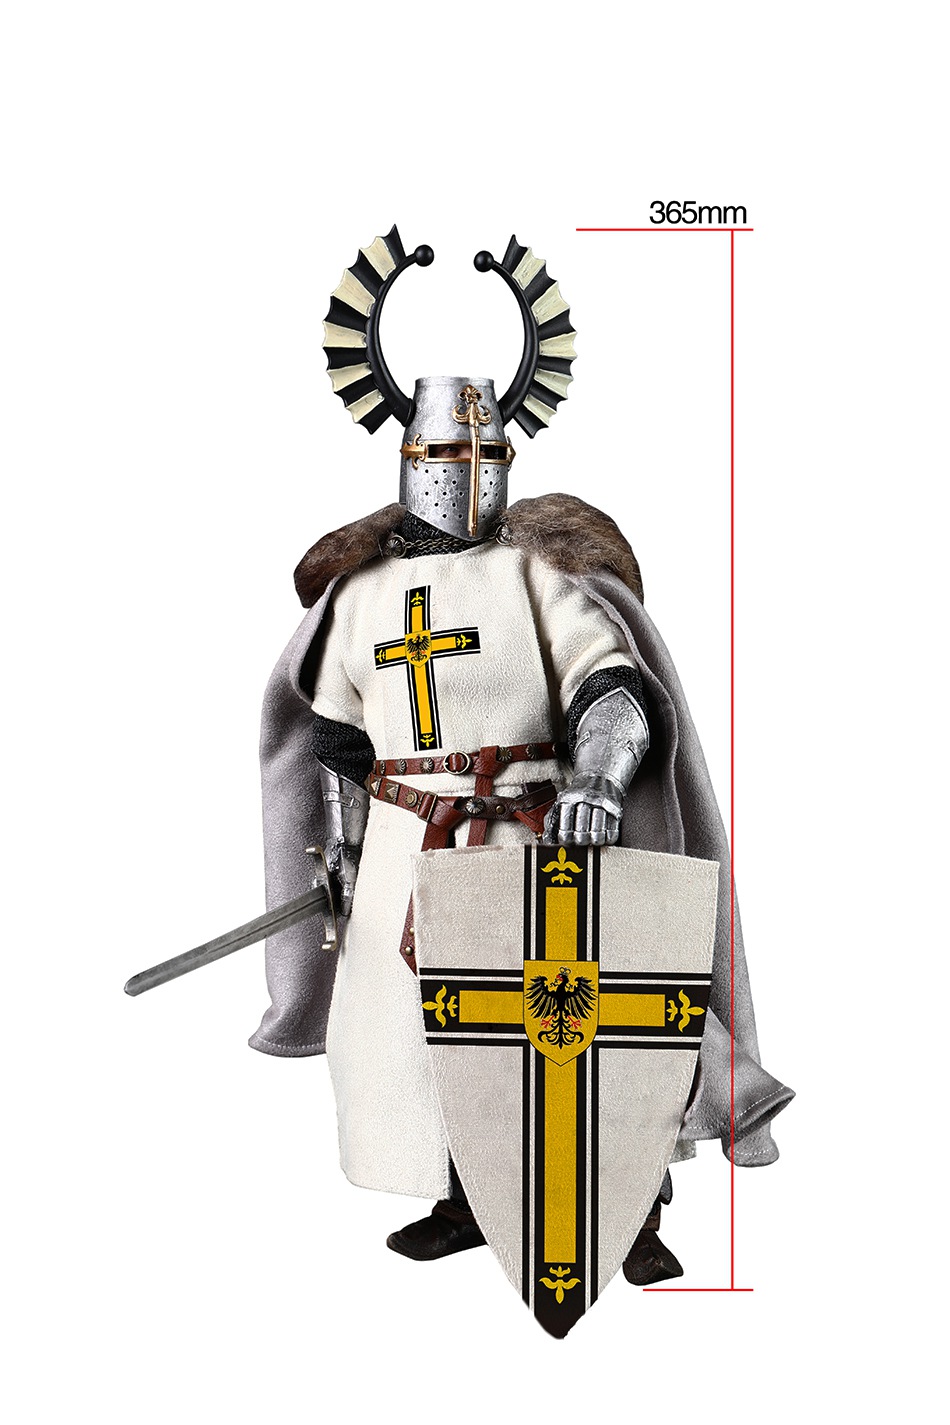 TeutonicKnight - NEW PRODUCT: Fire Phoenix: 1/6 die-cast alloy St. John’s Hospital Knight/Teutonic Knight and suit #FP001/FP002 17555910